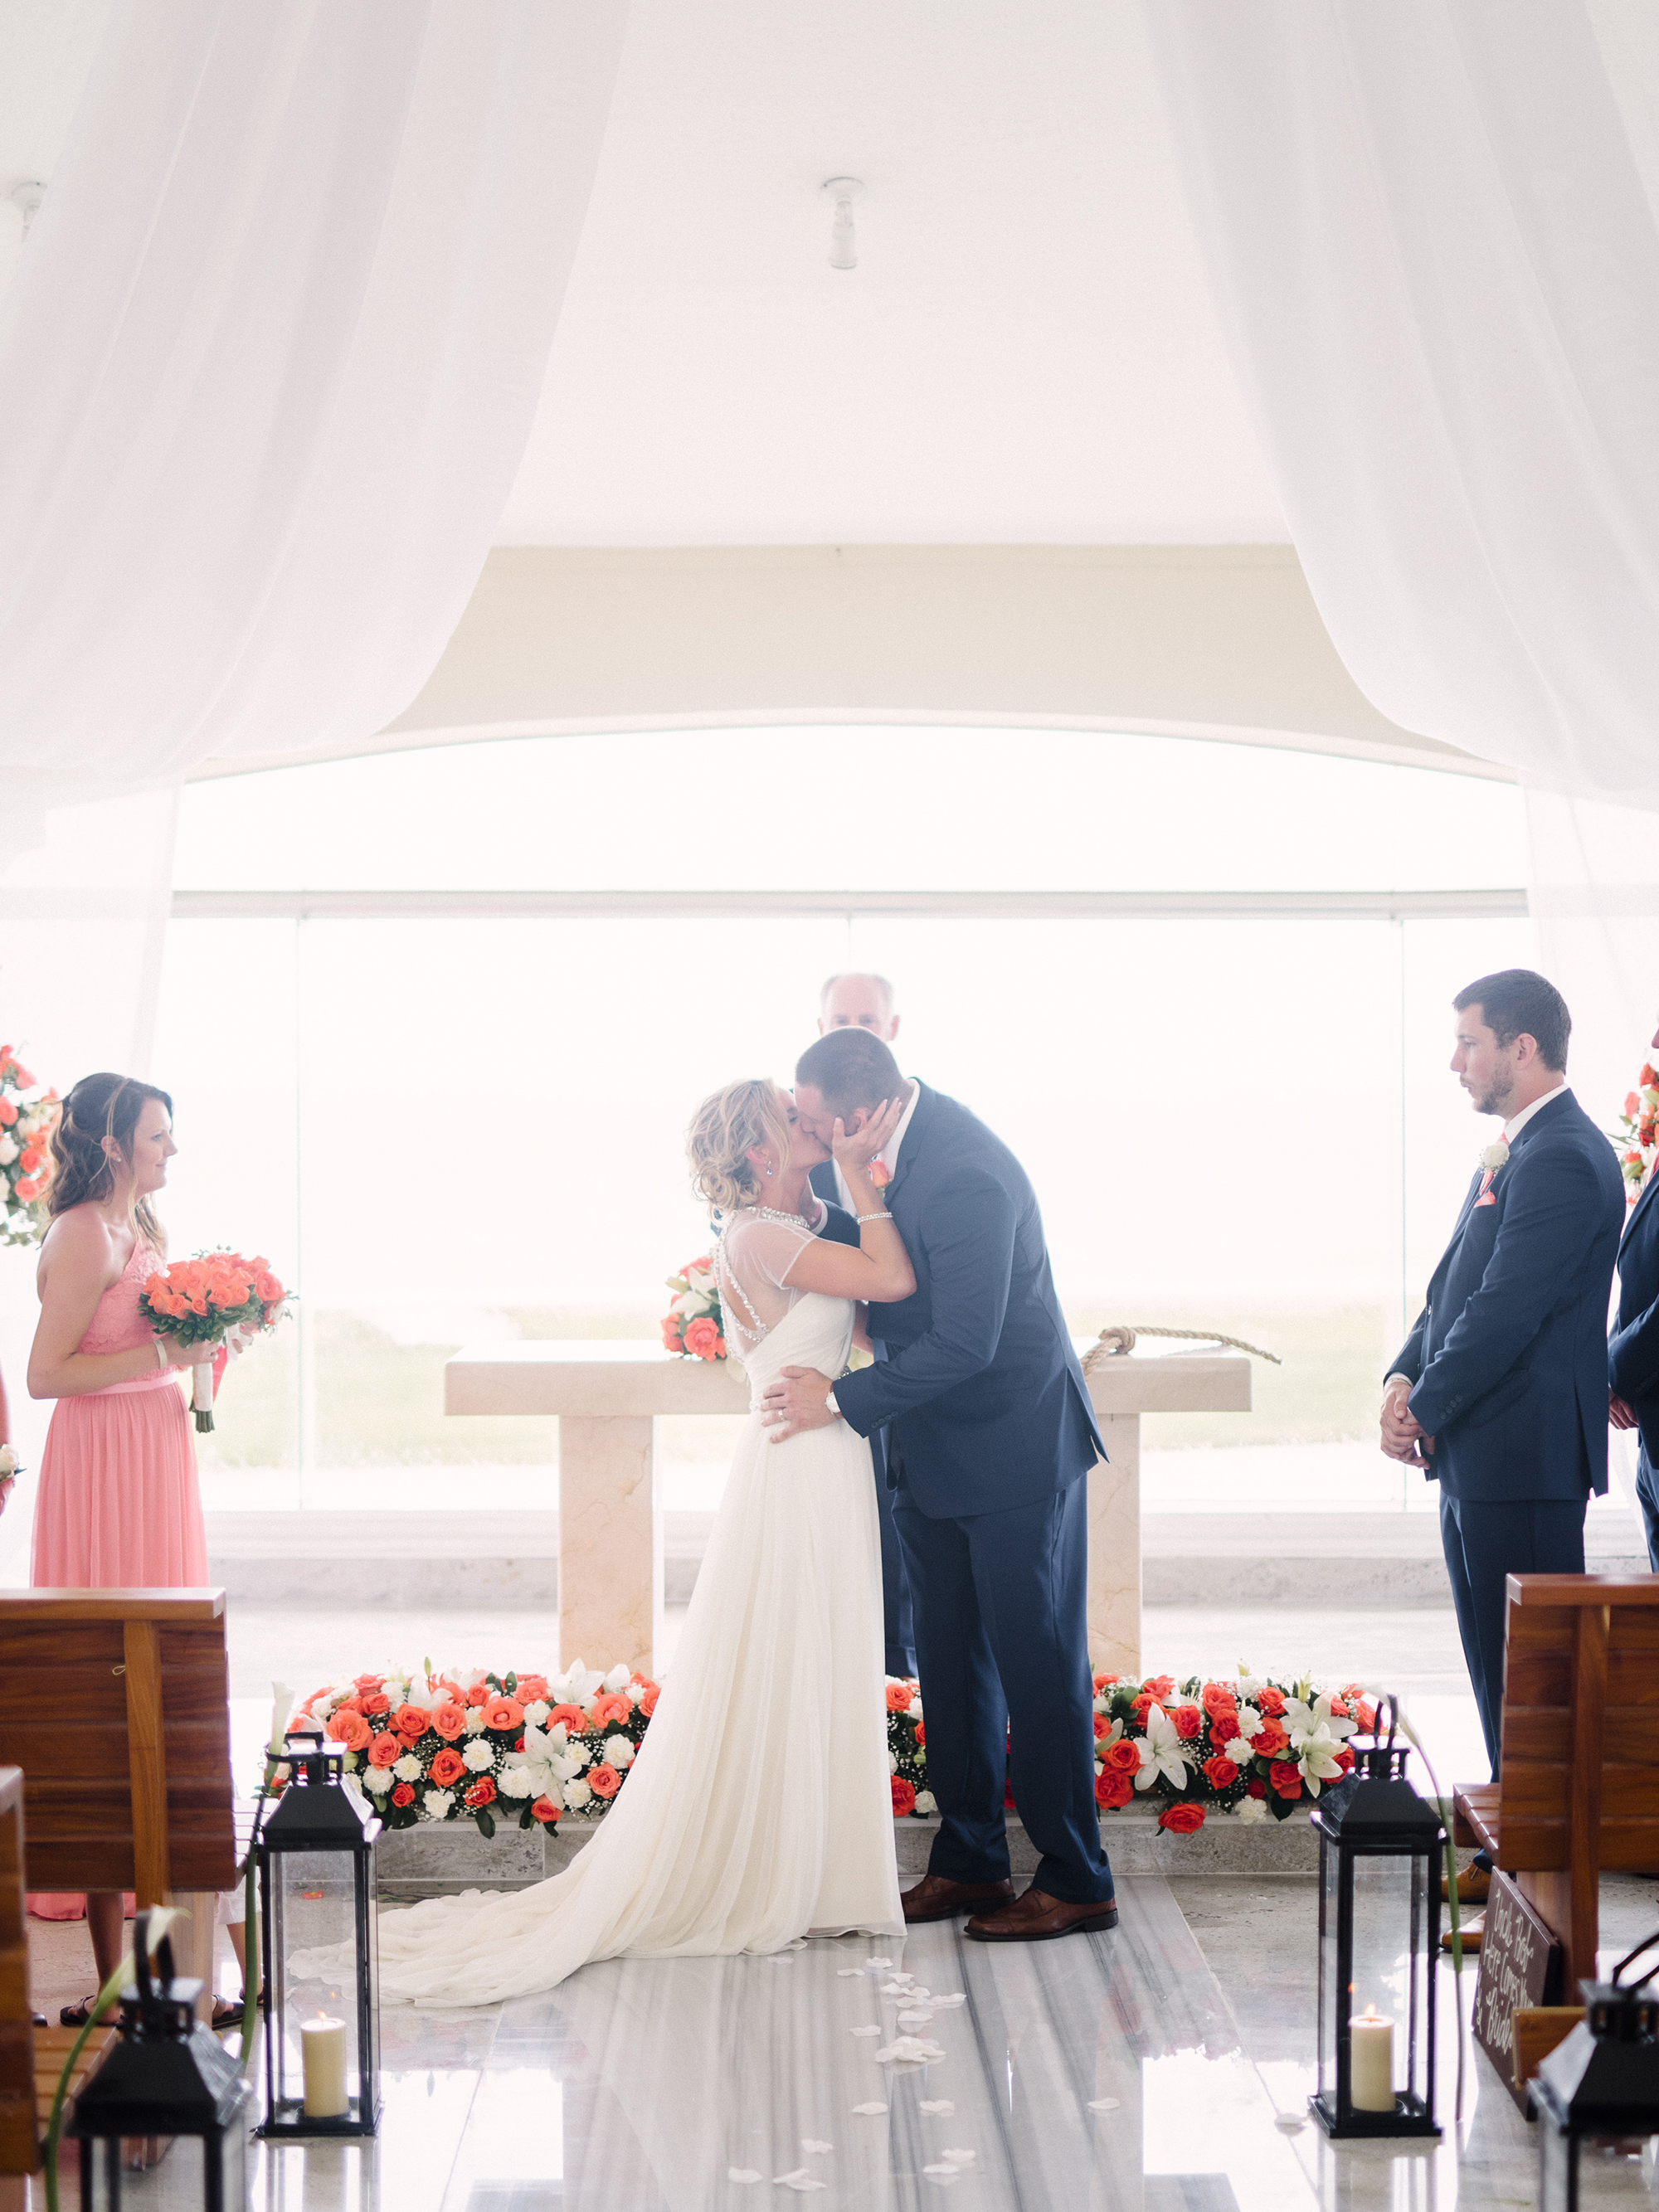 Wedding photographs by Rusty Wright, taken at the Moon Palace Resort in Riviera Maya, Mexico.